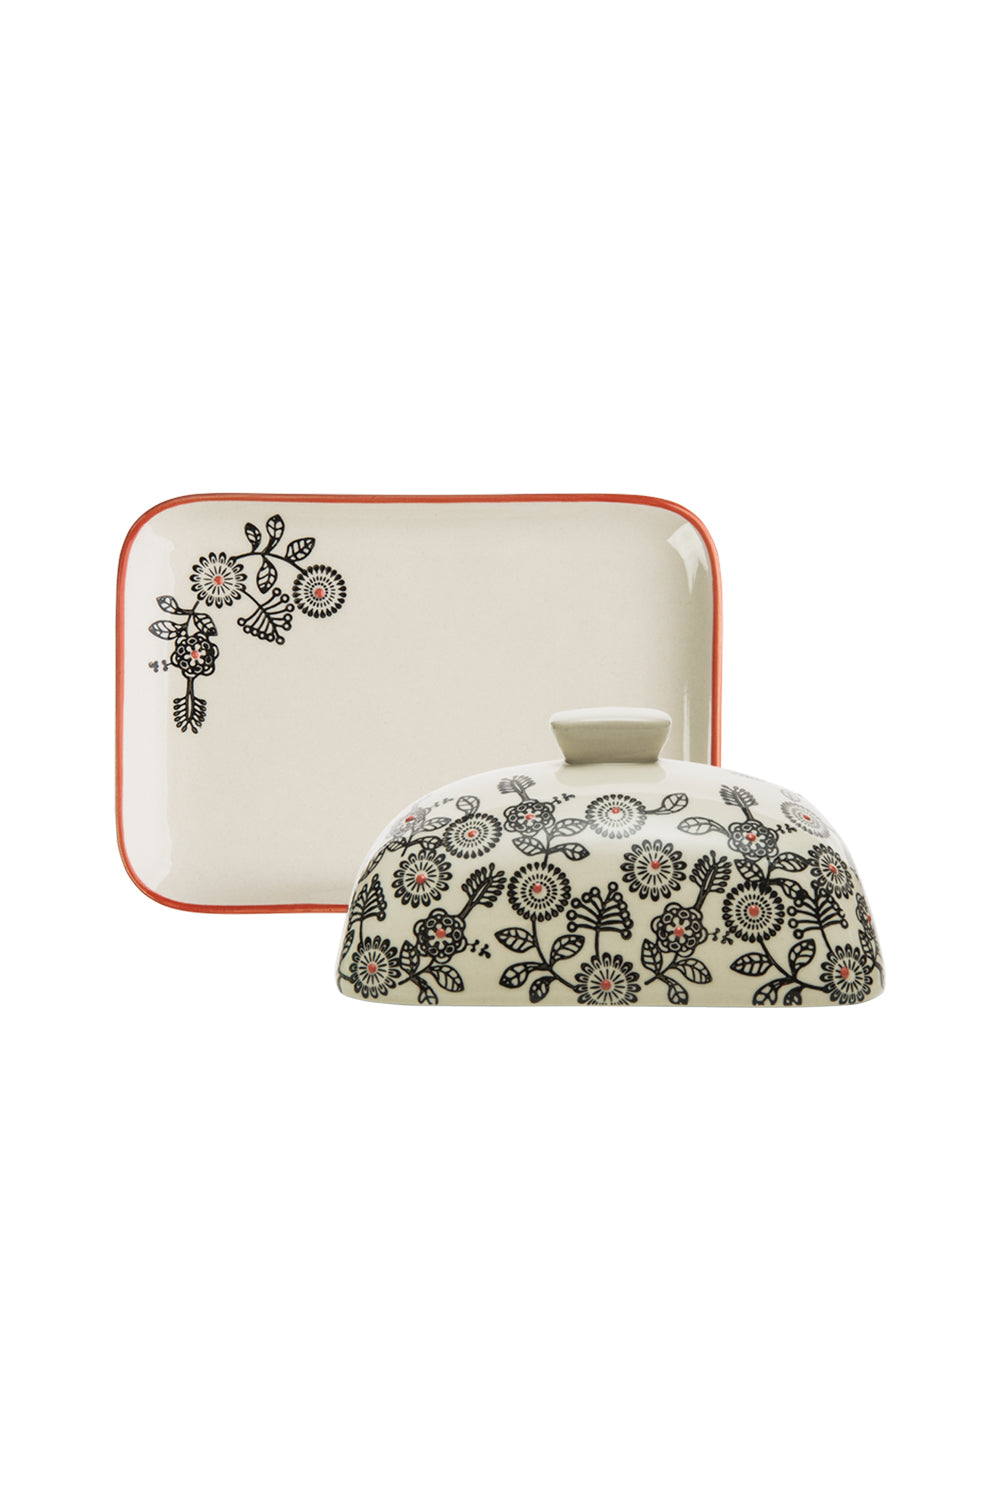 BUTTER DISH FLORAL